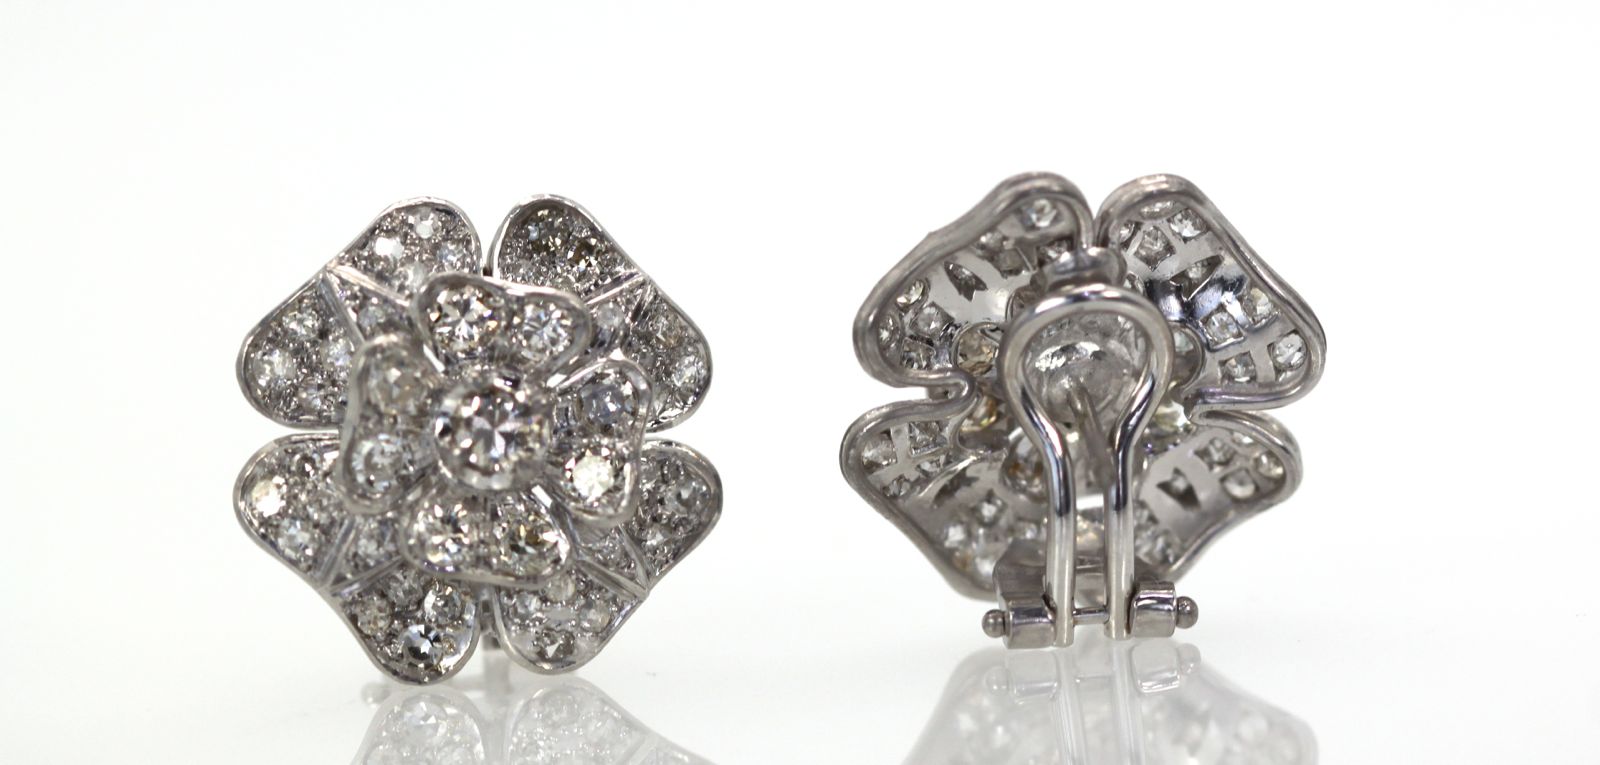 Vintage Platinum Diamond Rose Earrings early 20th Century Italy 3.00 Carats front and back